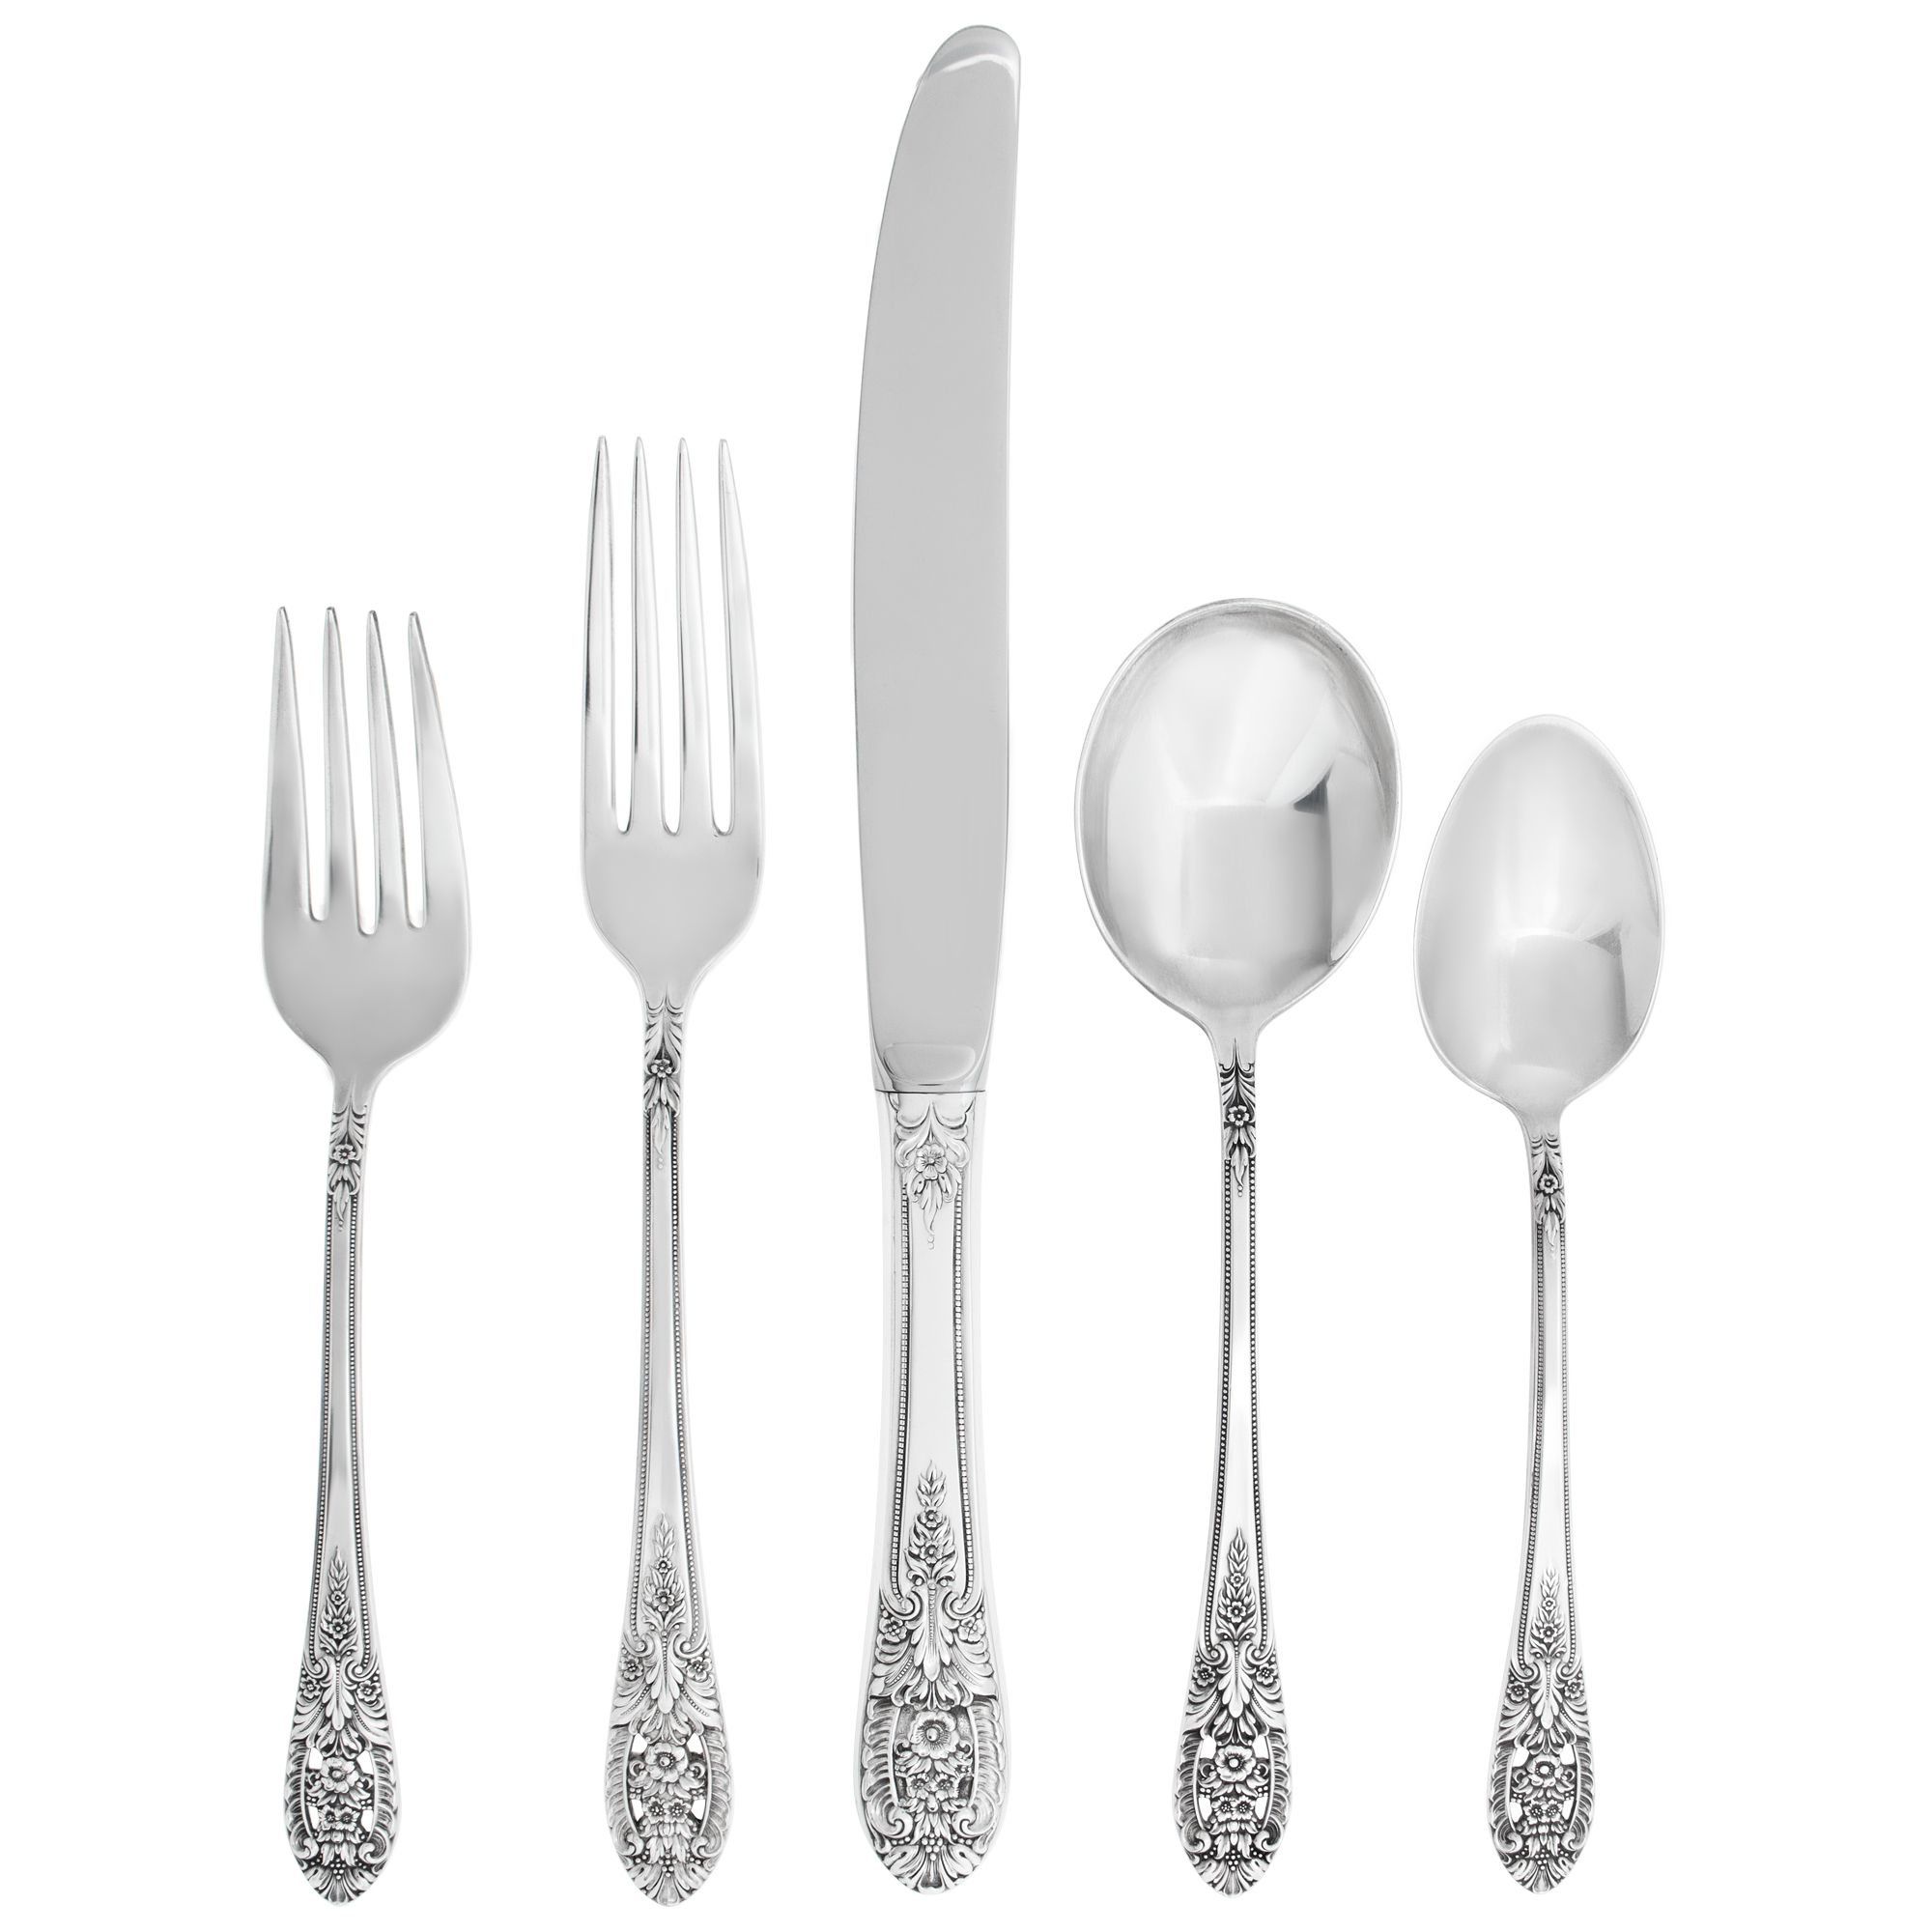 CROWN PRINCESS sterling silver flatware patented in 1949 by Fine Arts Company. 5 Place for 6. Total 30 pieces.